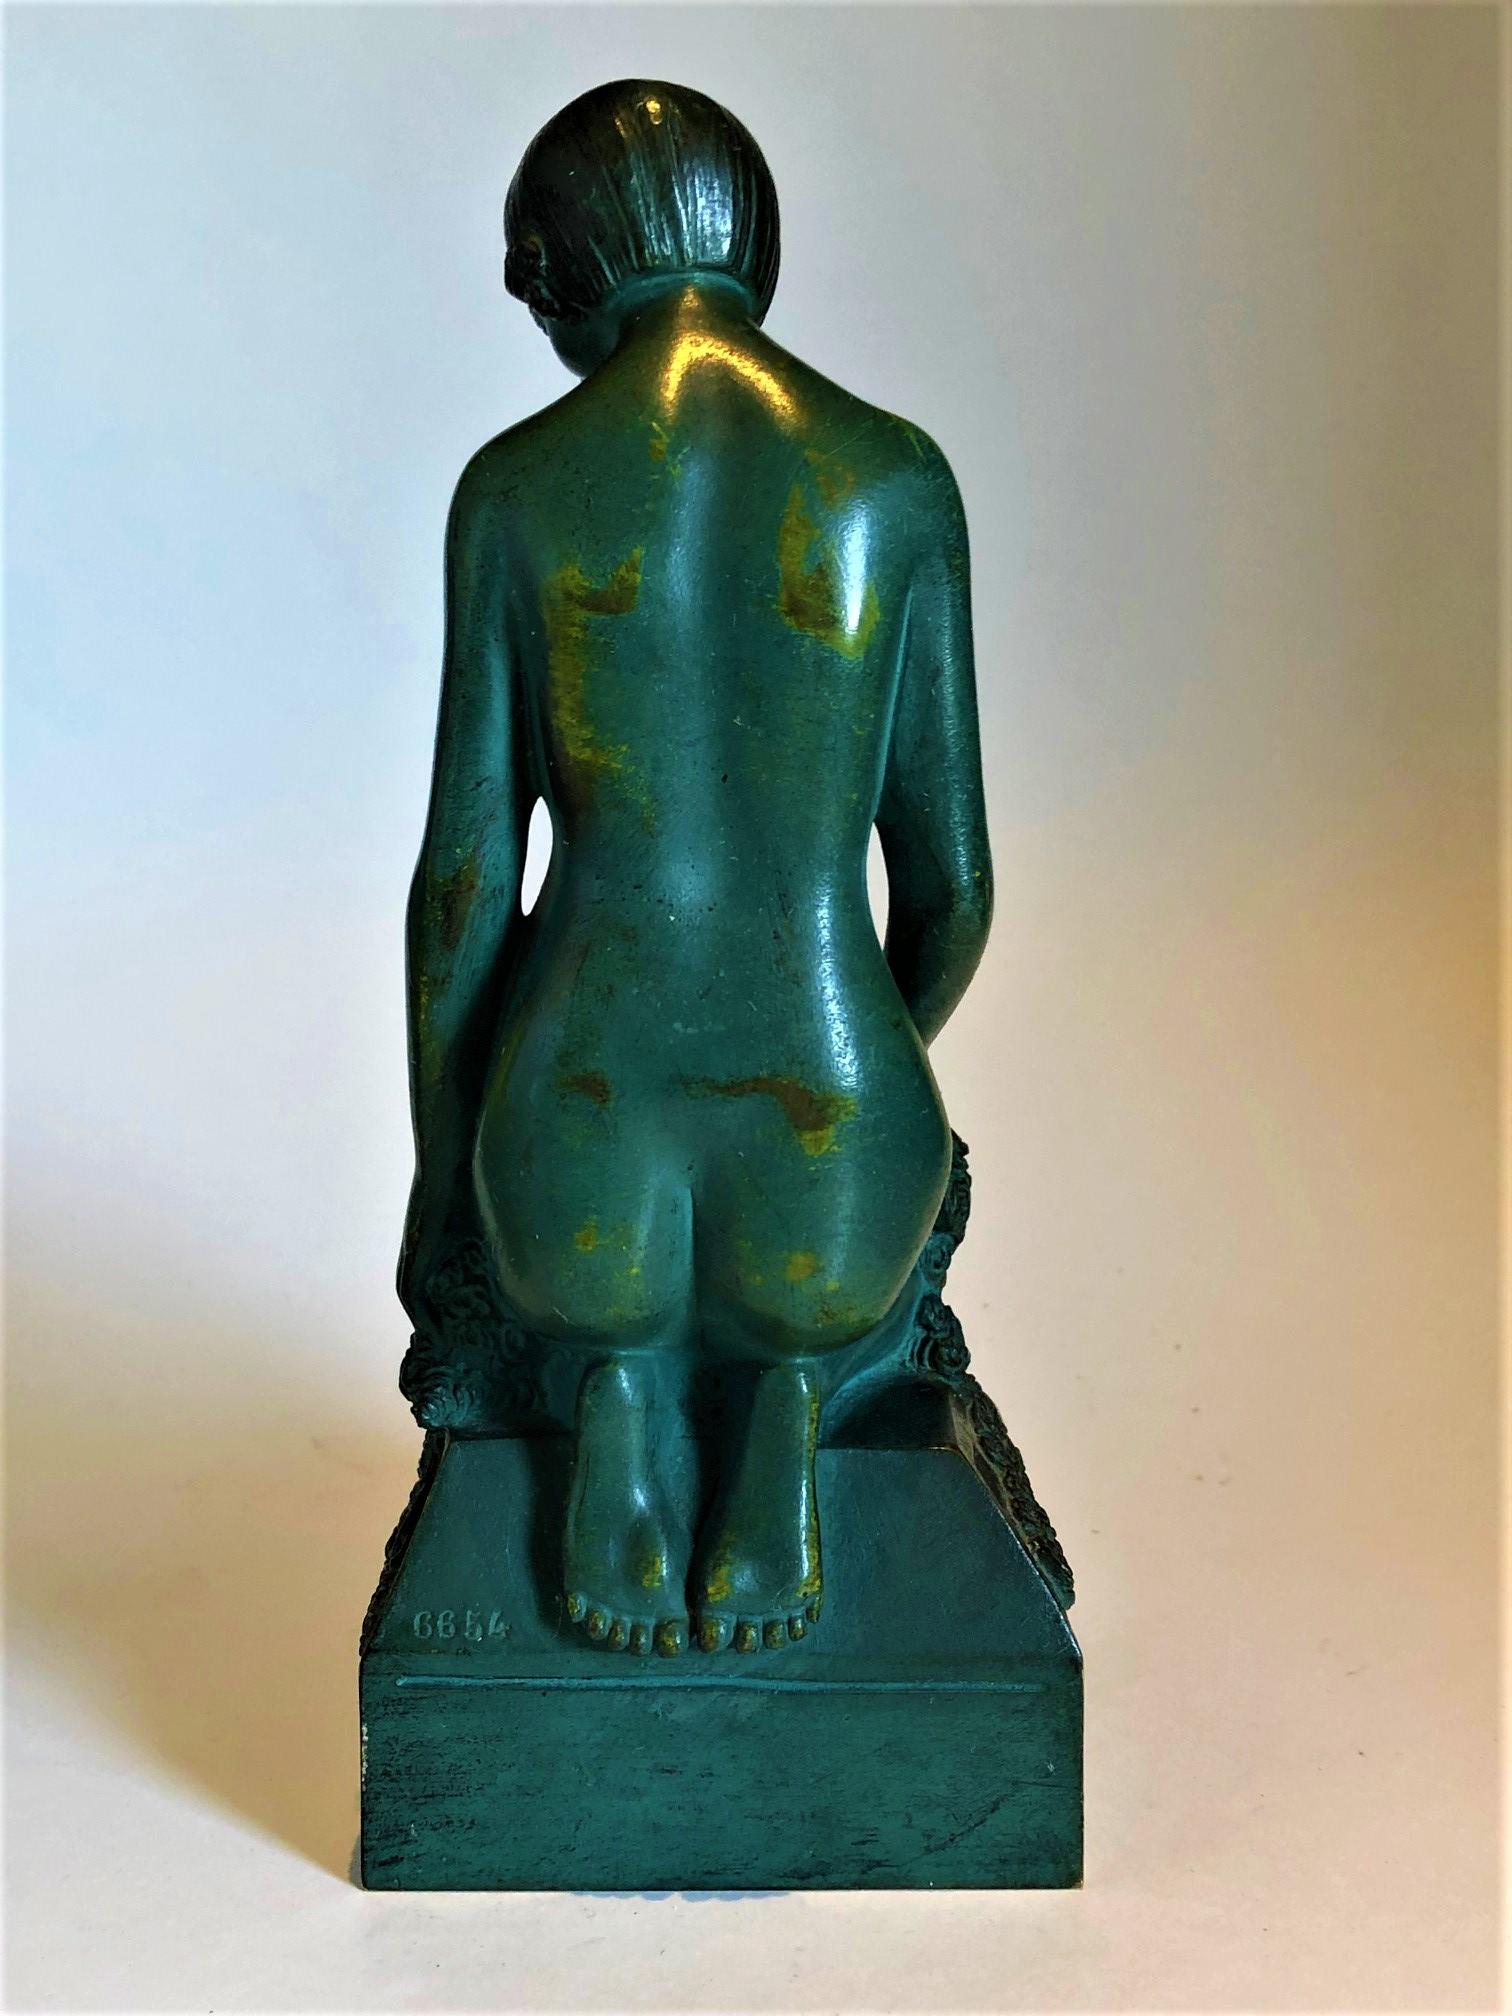 French Art Deco Nude Erotic Woman Bronze Bookends, c. France 1925, Signed Scribe